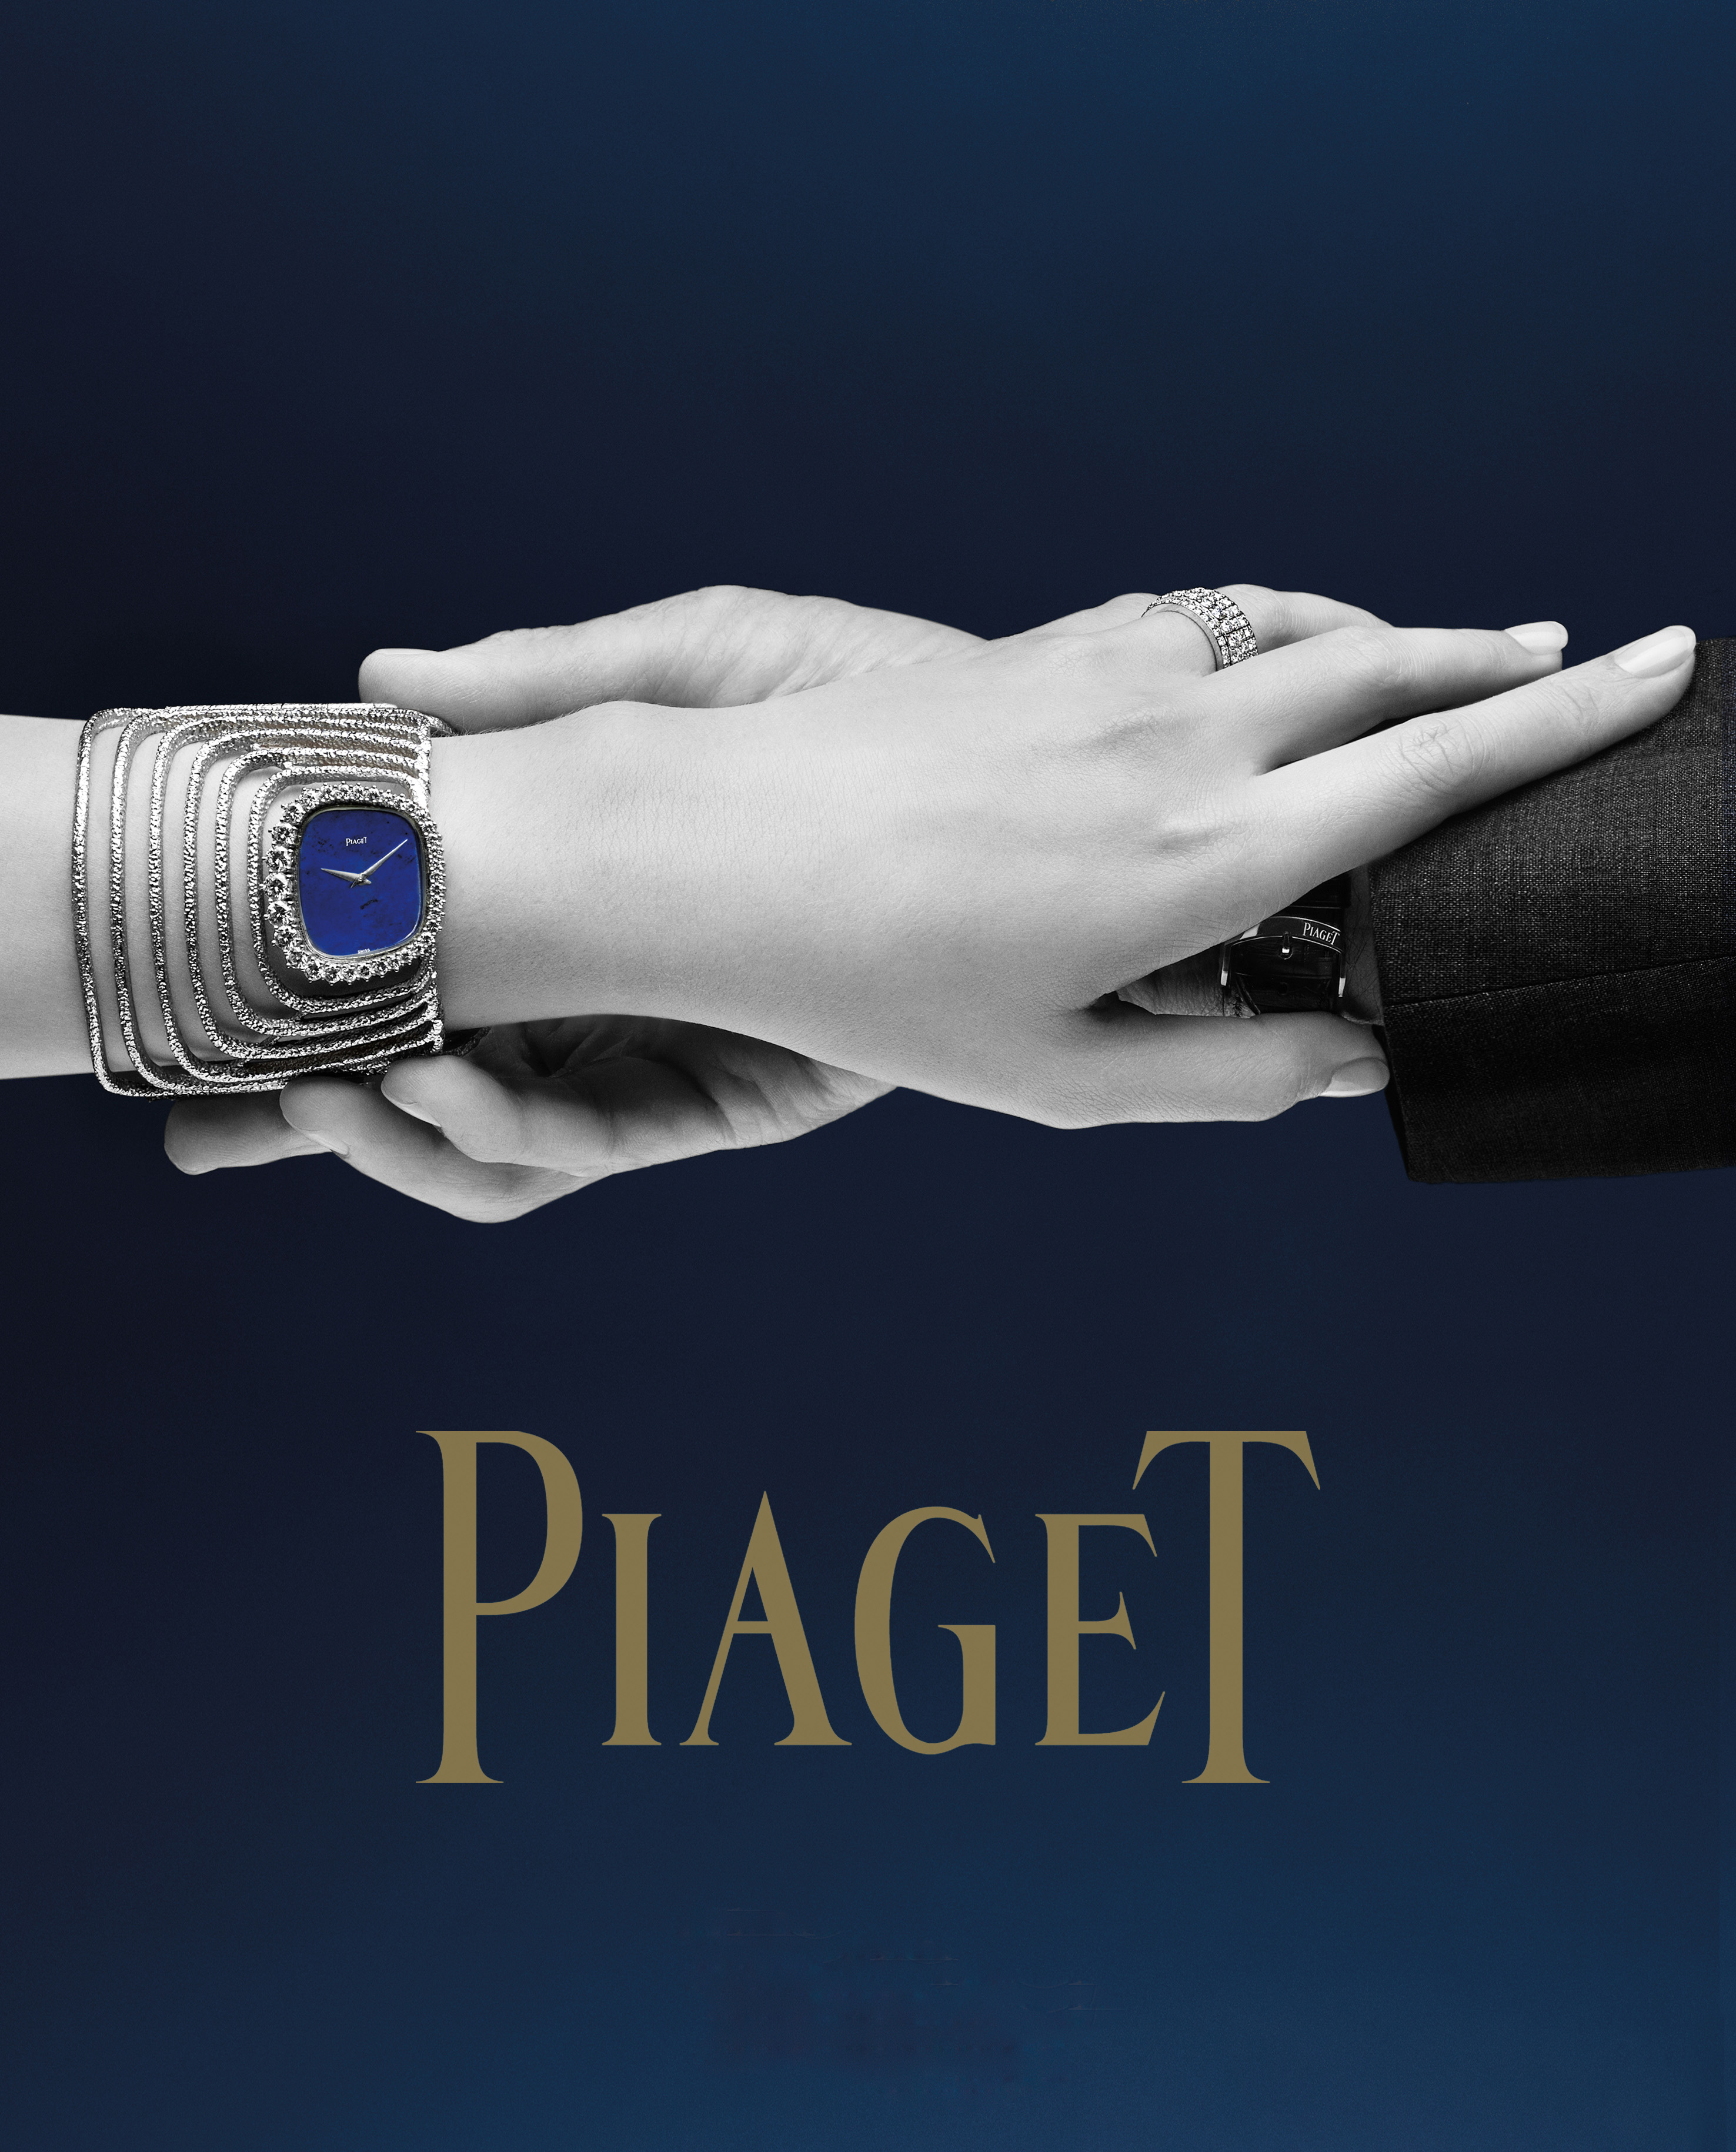 Yves Piaget On The New Piaget Tome, Which Documents 140 Years Of